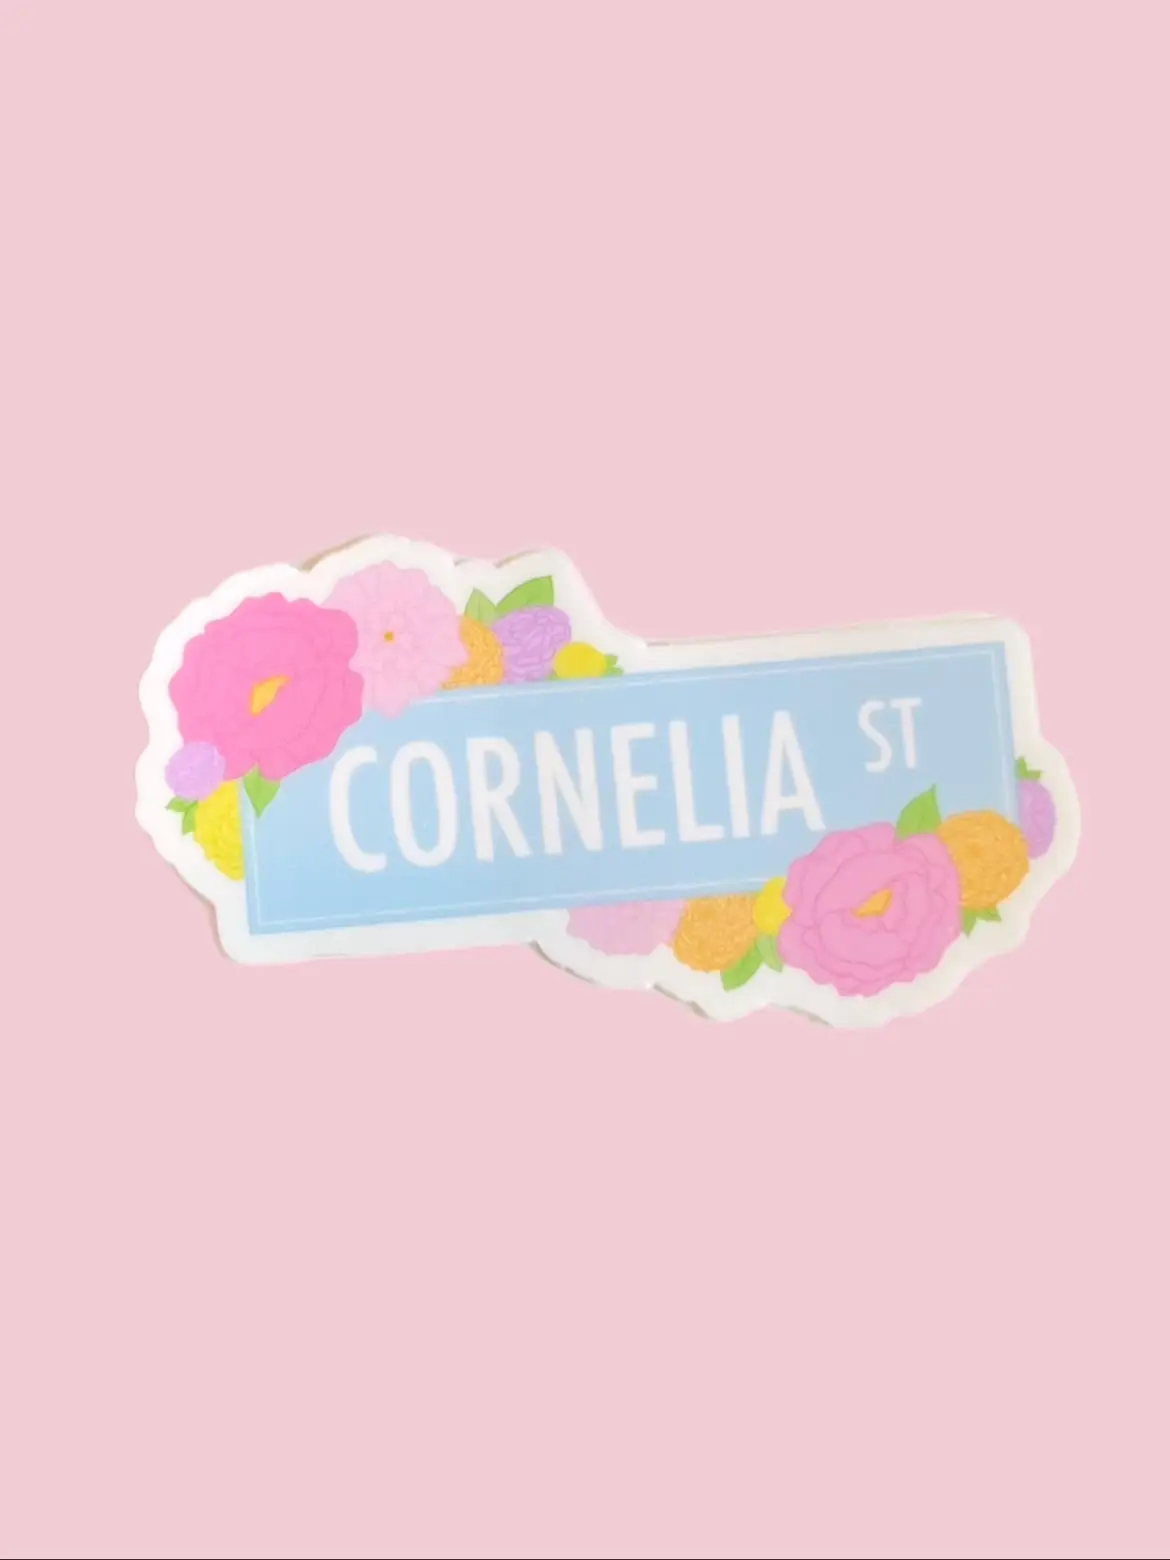 Cornelia St - Taylor Swift sticker!, Gallery posted by PinkPark